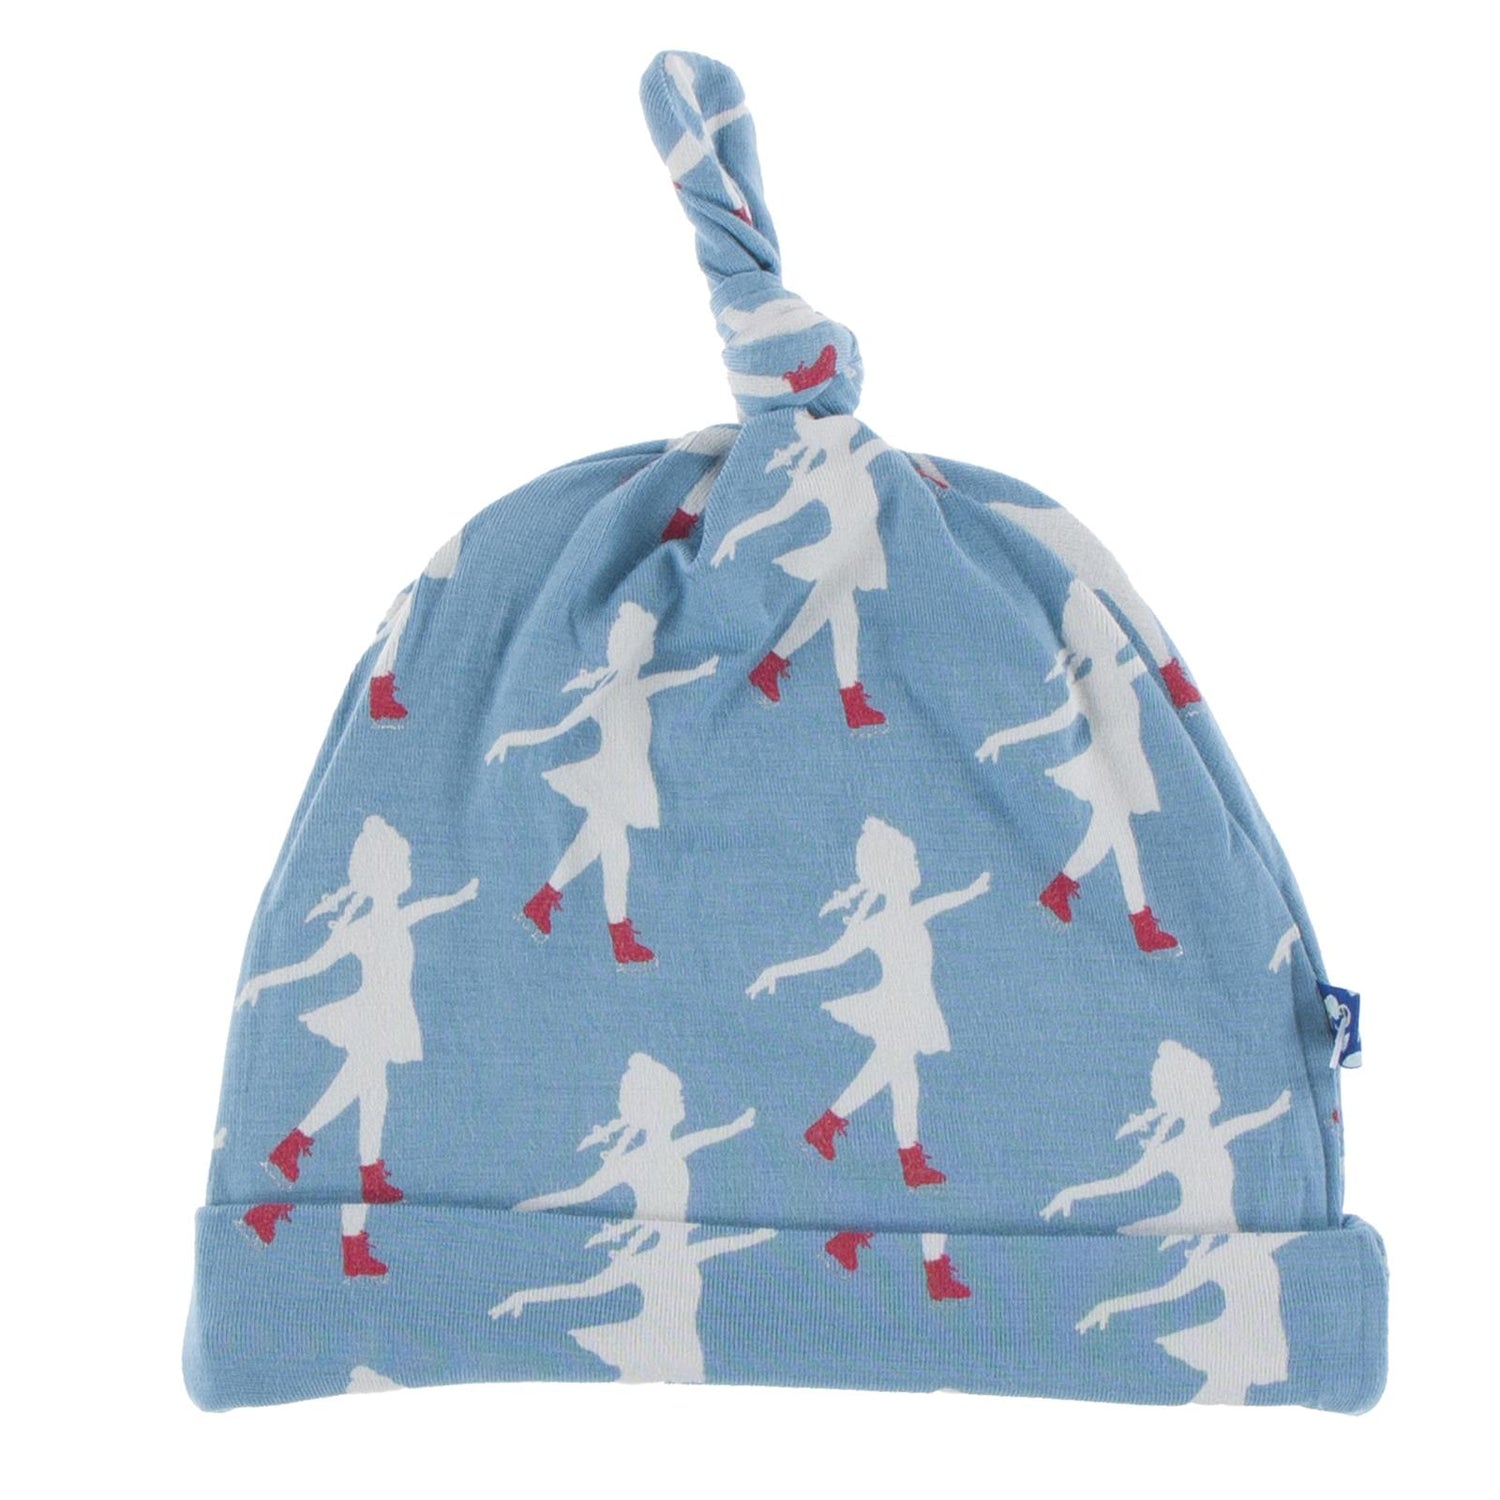 Print Knot Hat in Blue Moon Ice Skater